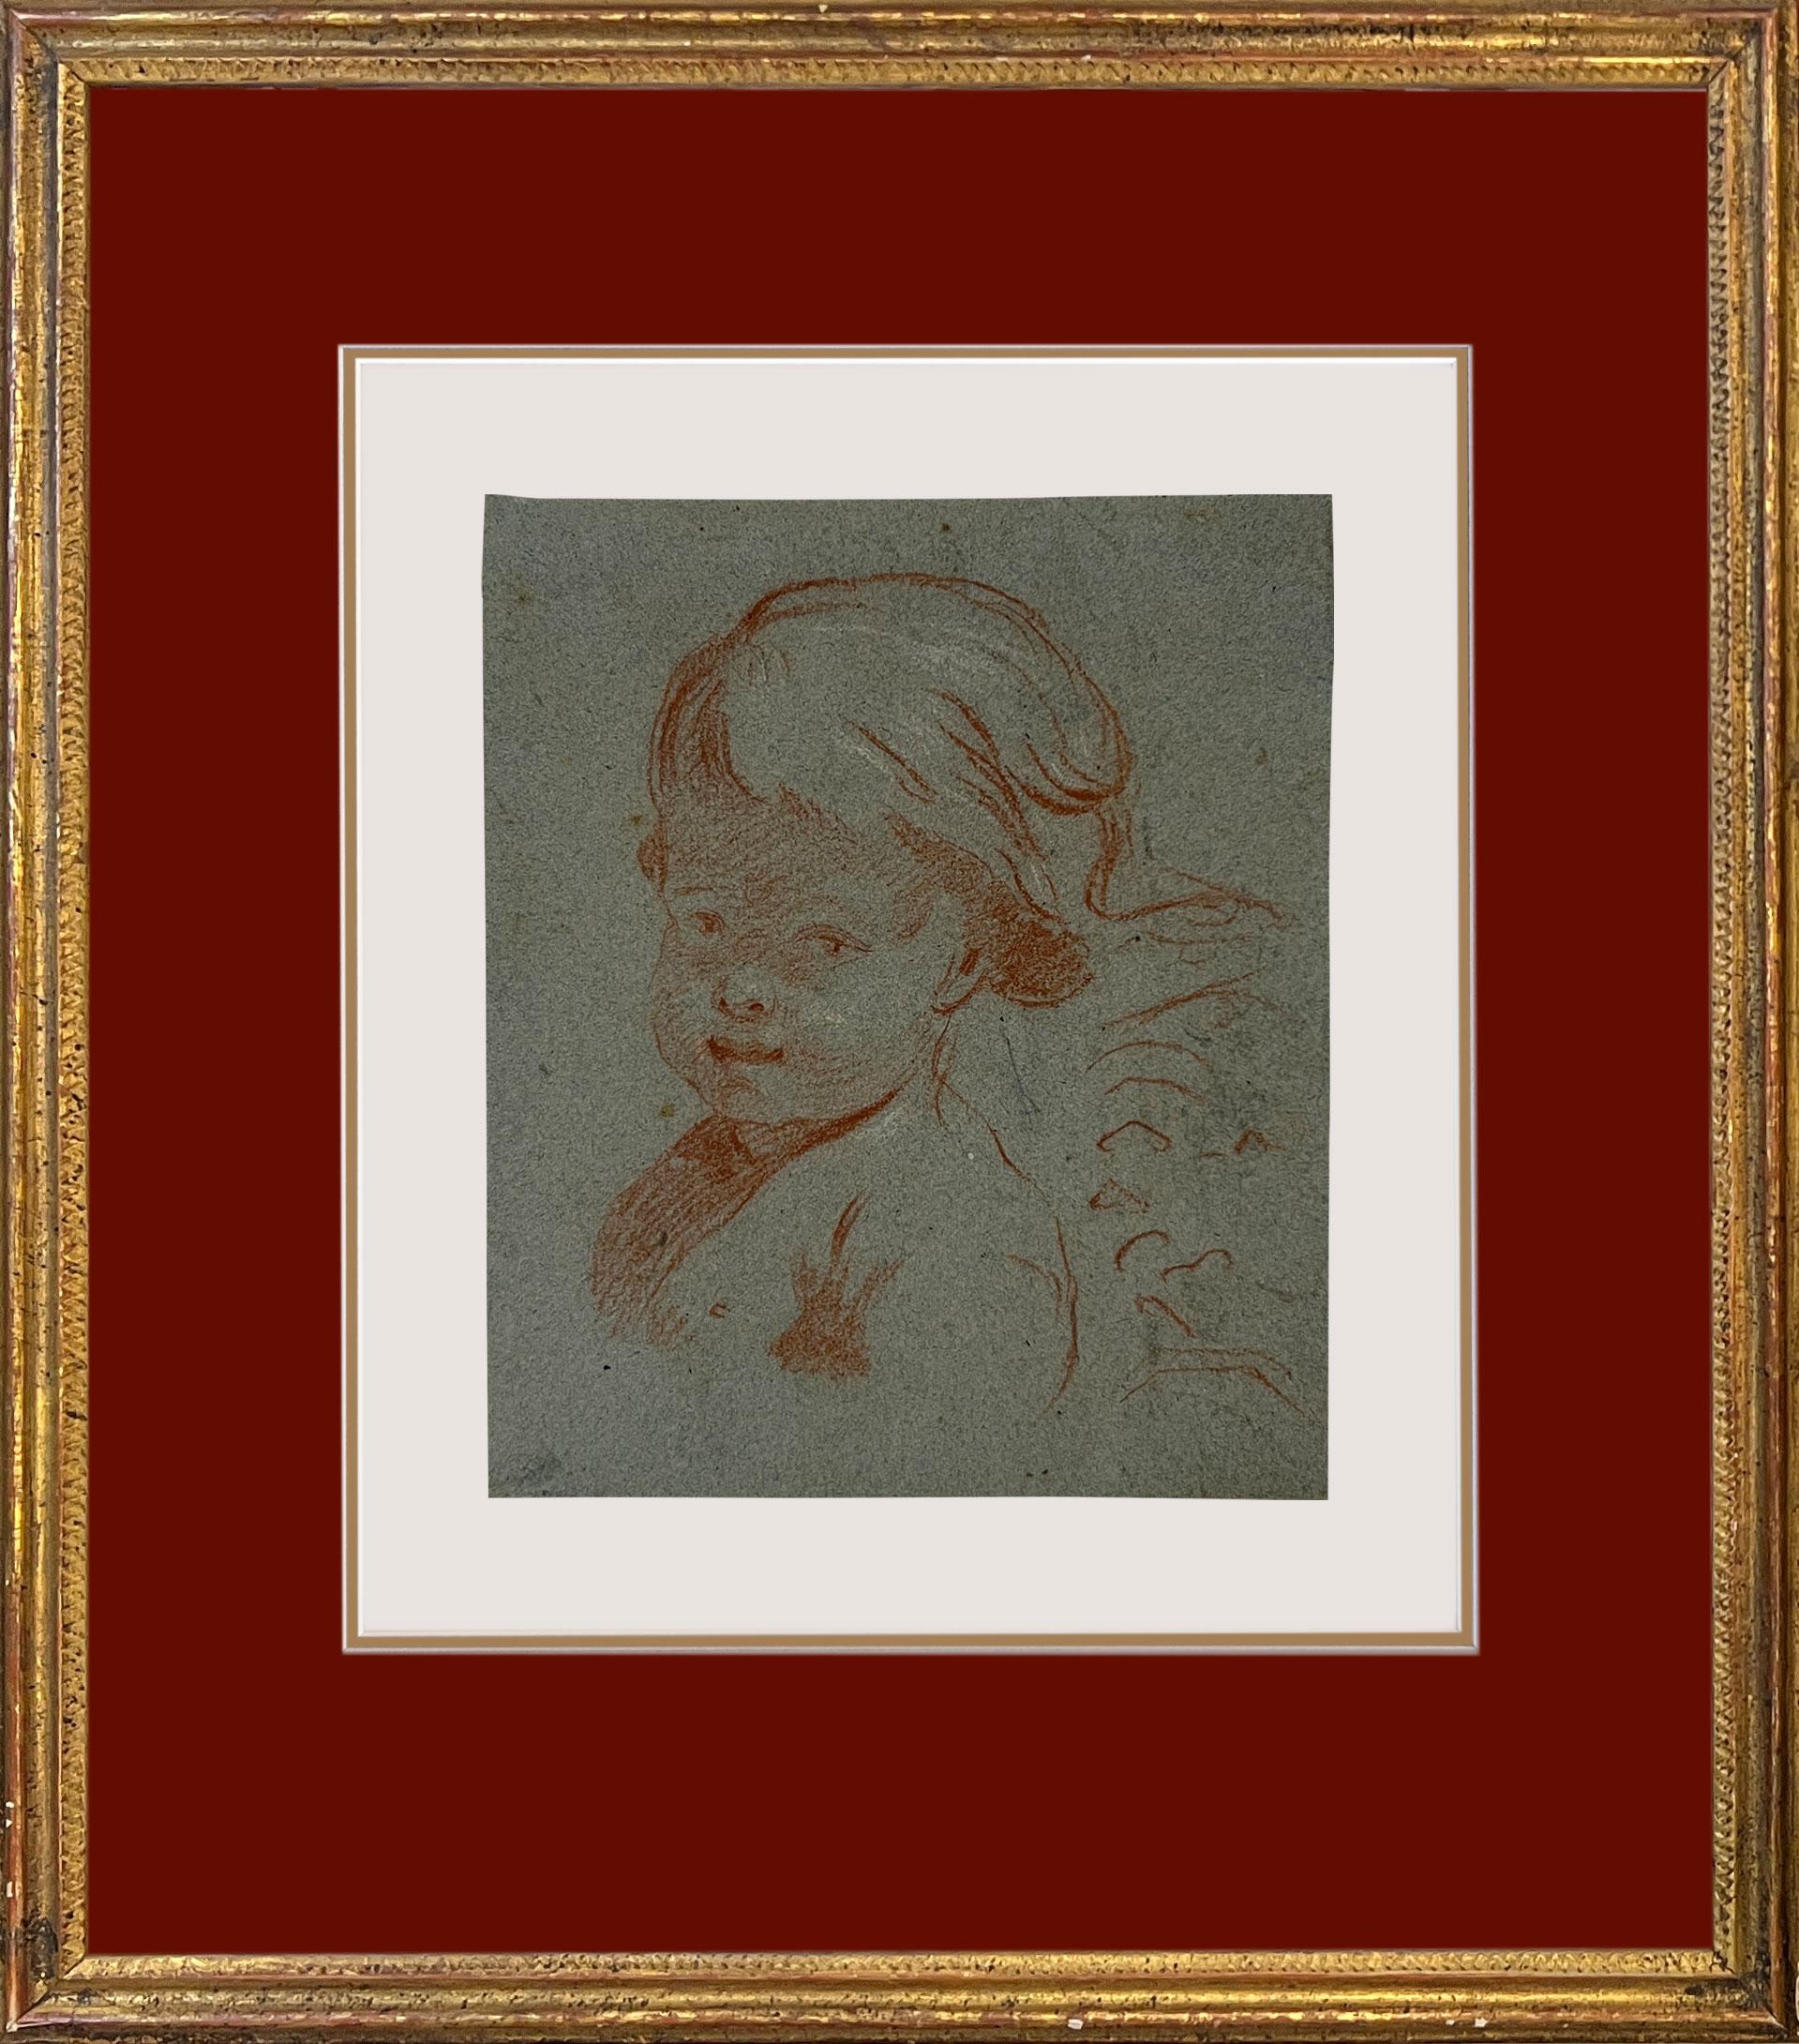  Study of a Child. Circle of François Boucher (French 1703 - 1770)